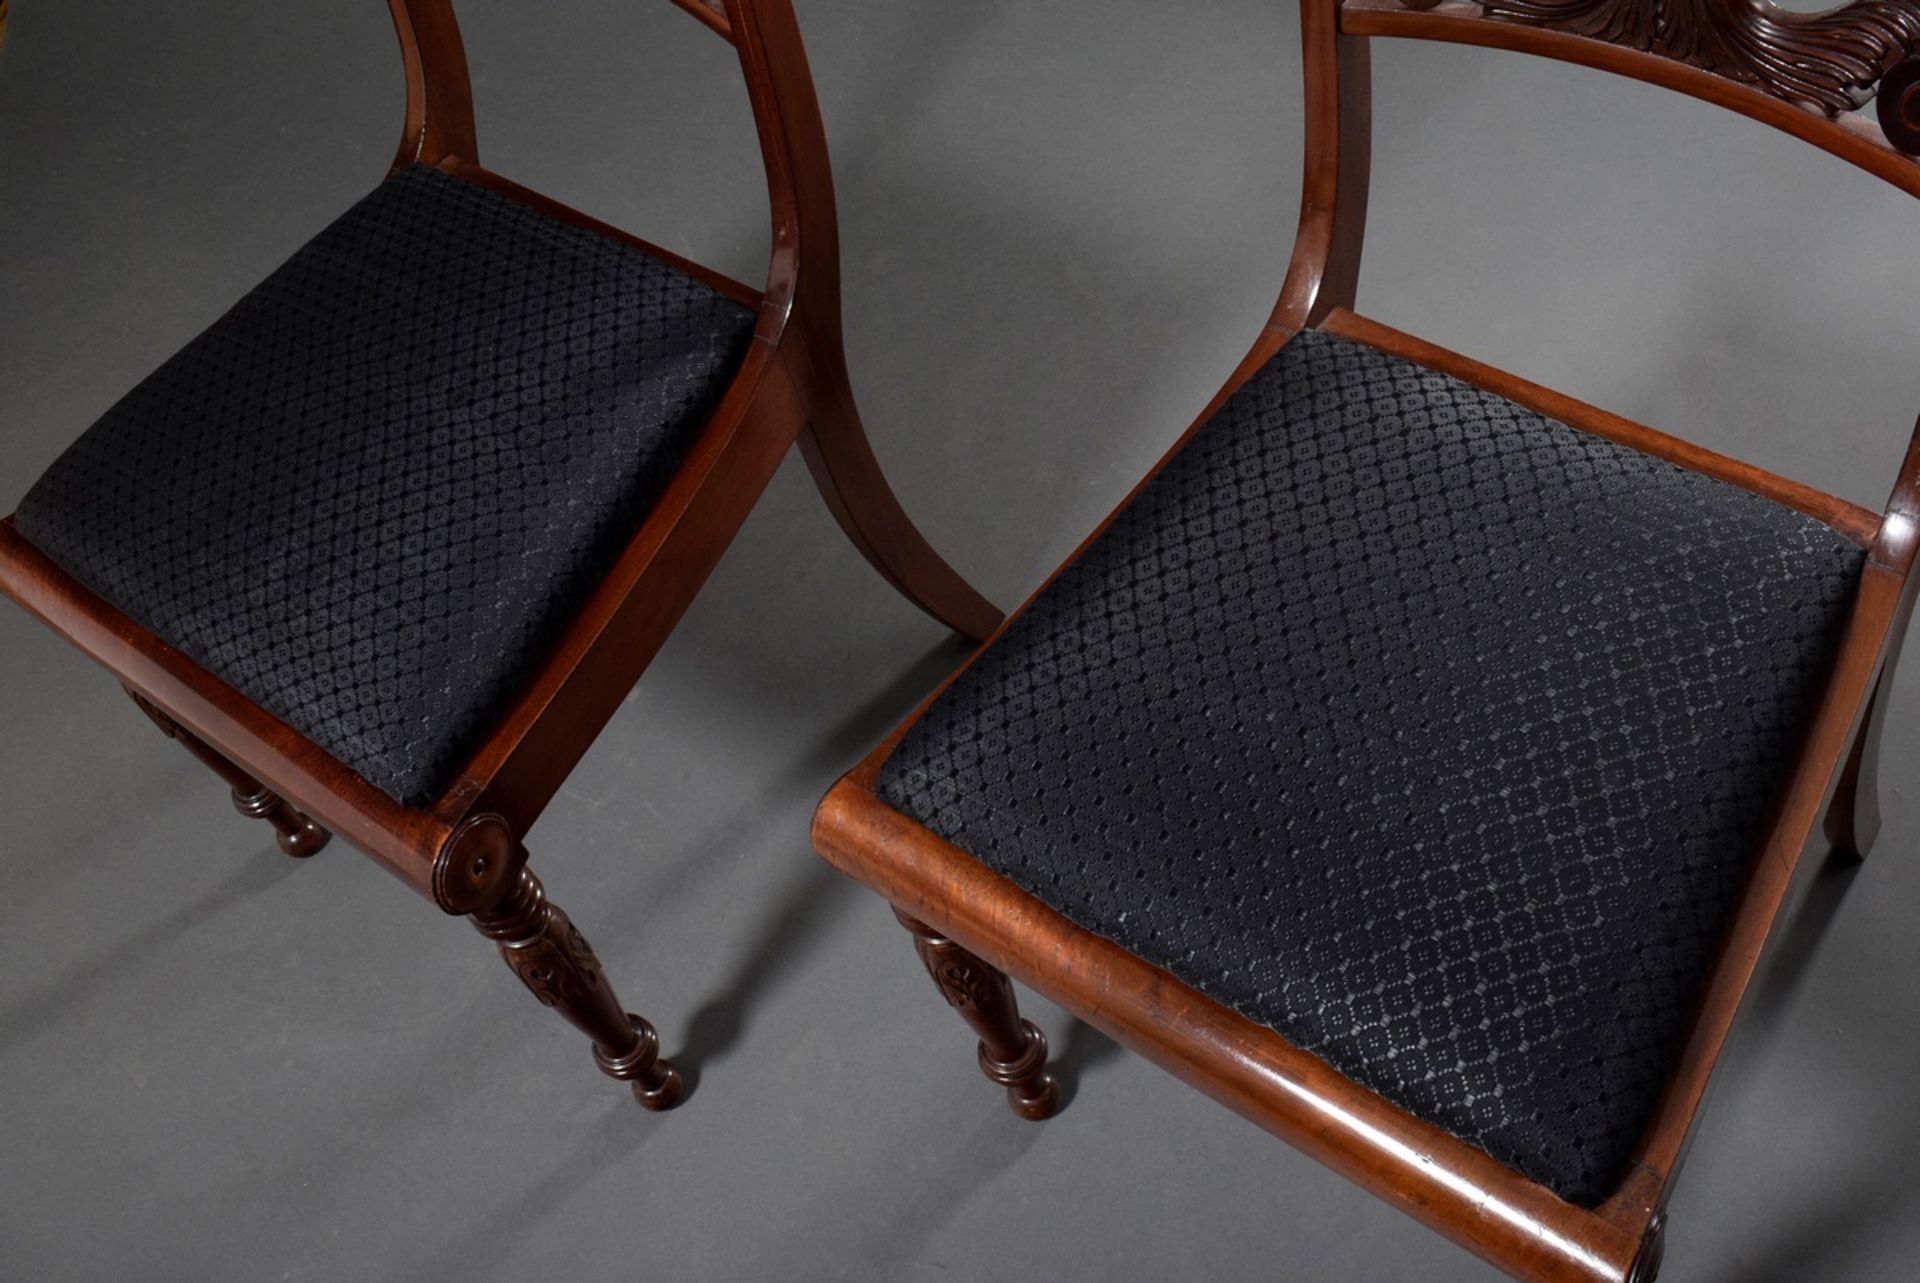 Pair of Biedermeier chairs with floral carved back board, turned legs and horsehair upholstery, mah - Image 6 of 6